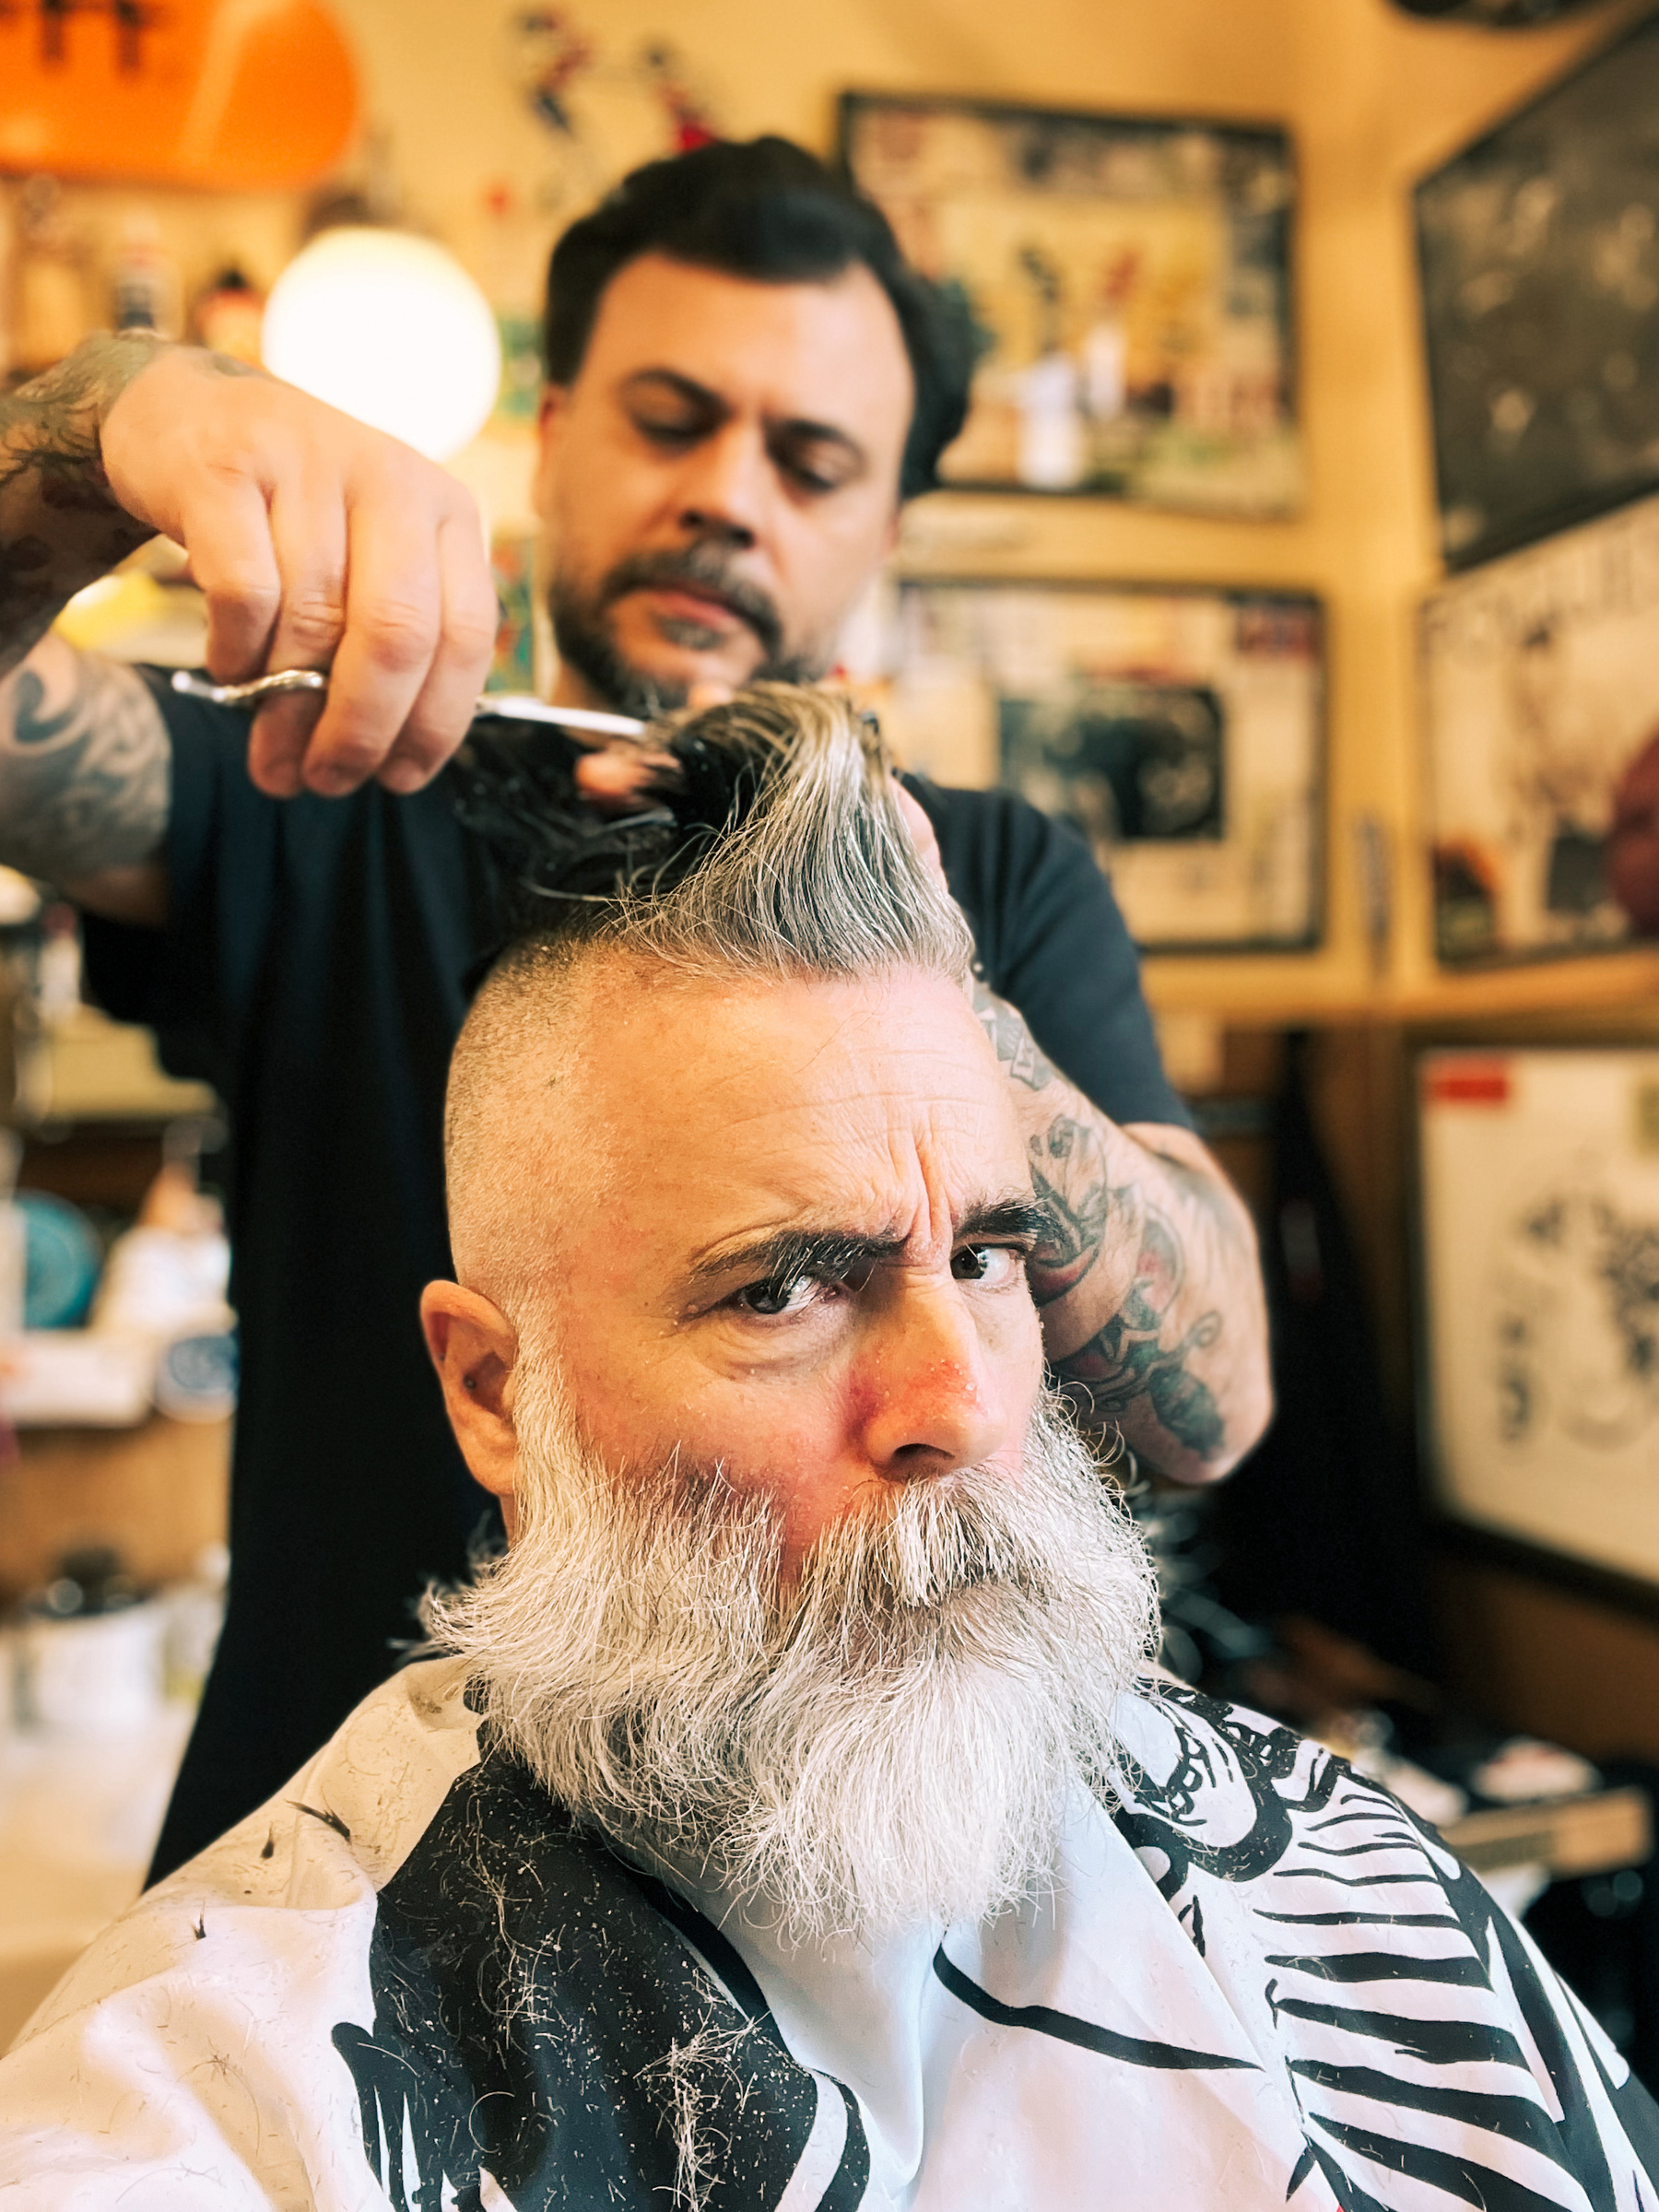 A barber with tattoos is styling a client&rsquo;s hair in a barber shop. The client, with a prominent white beard, is seated and looking intensely at the camera. The scene has a vintage feel with decor on the walls. 